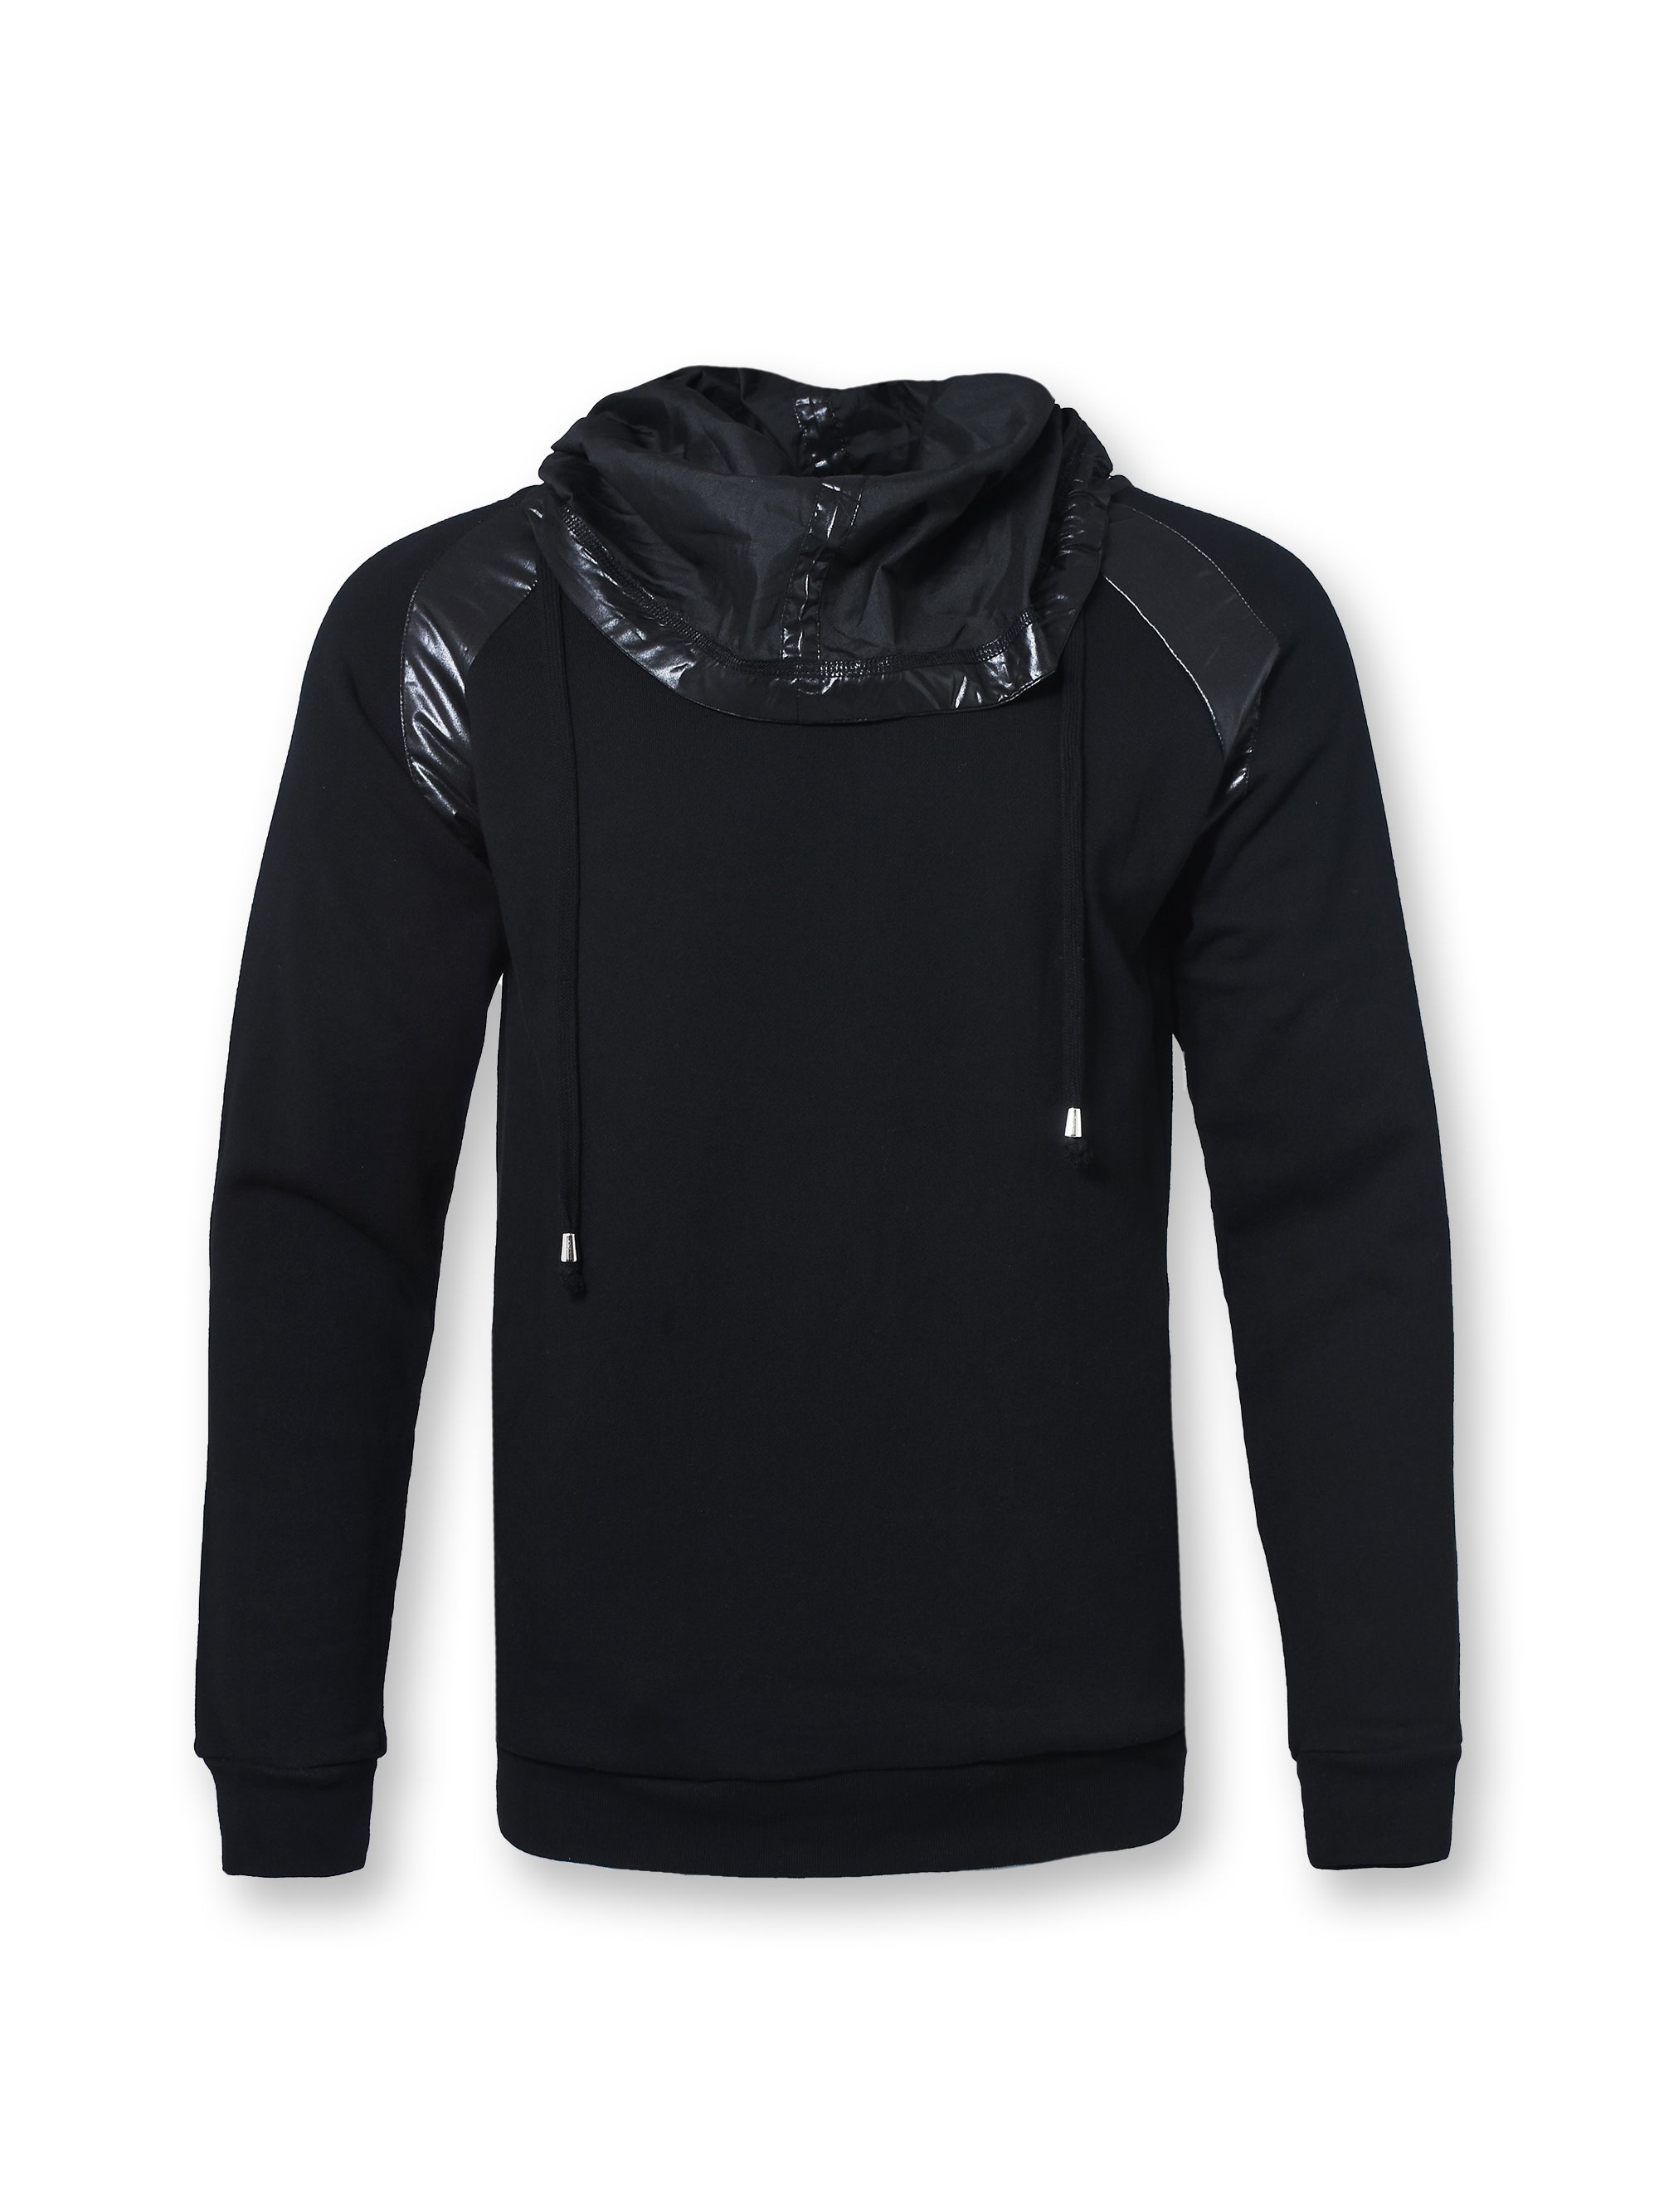 Black Funnel Neck Hoodie With Satin Details